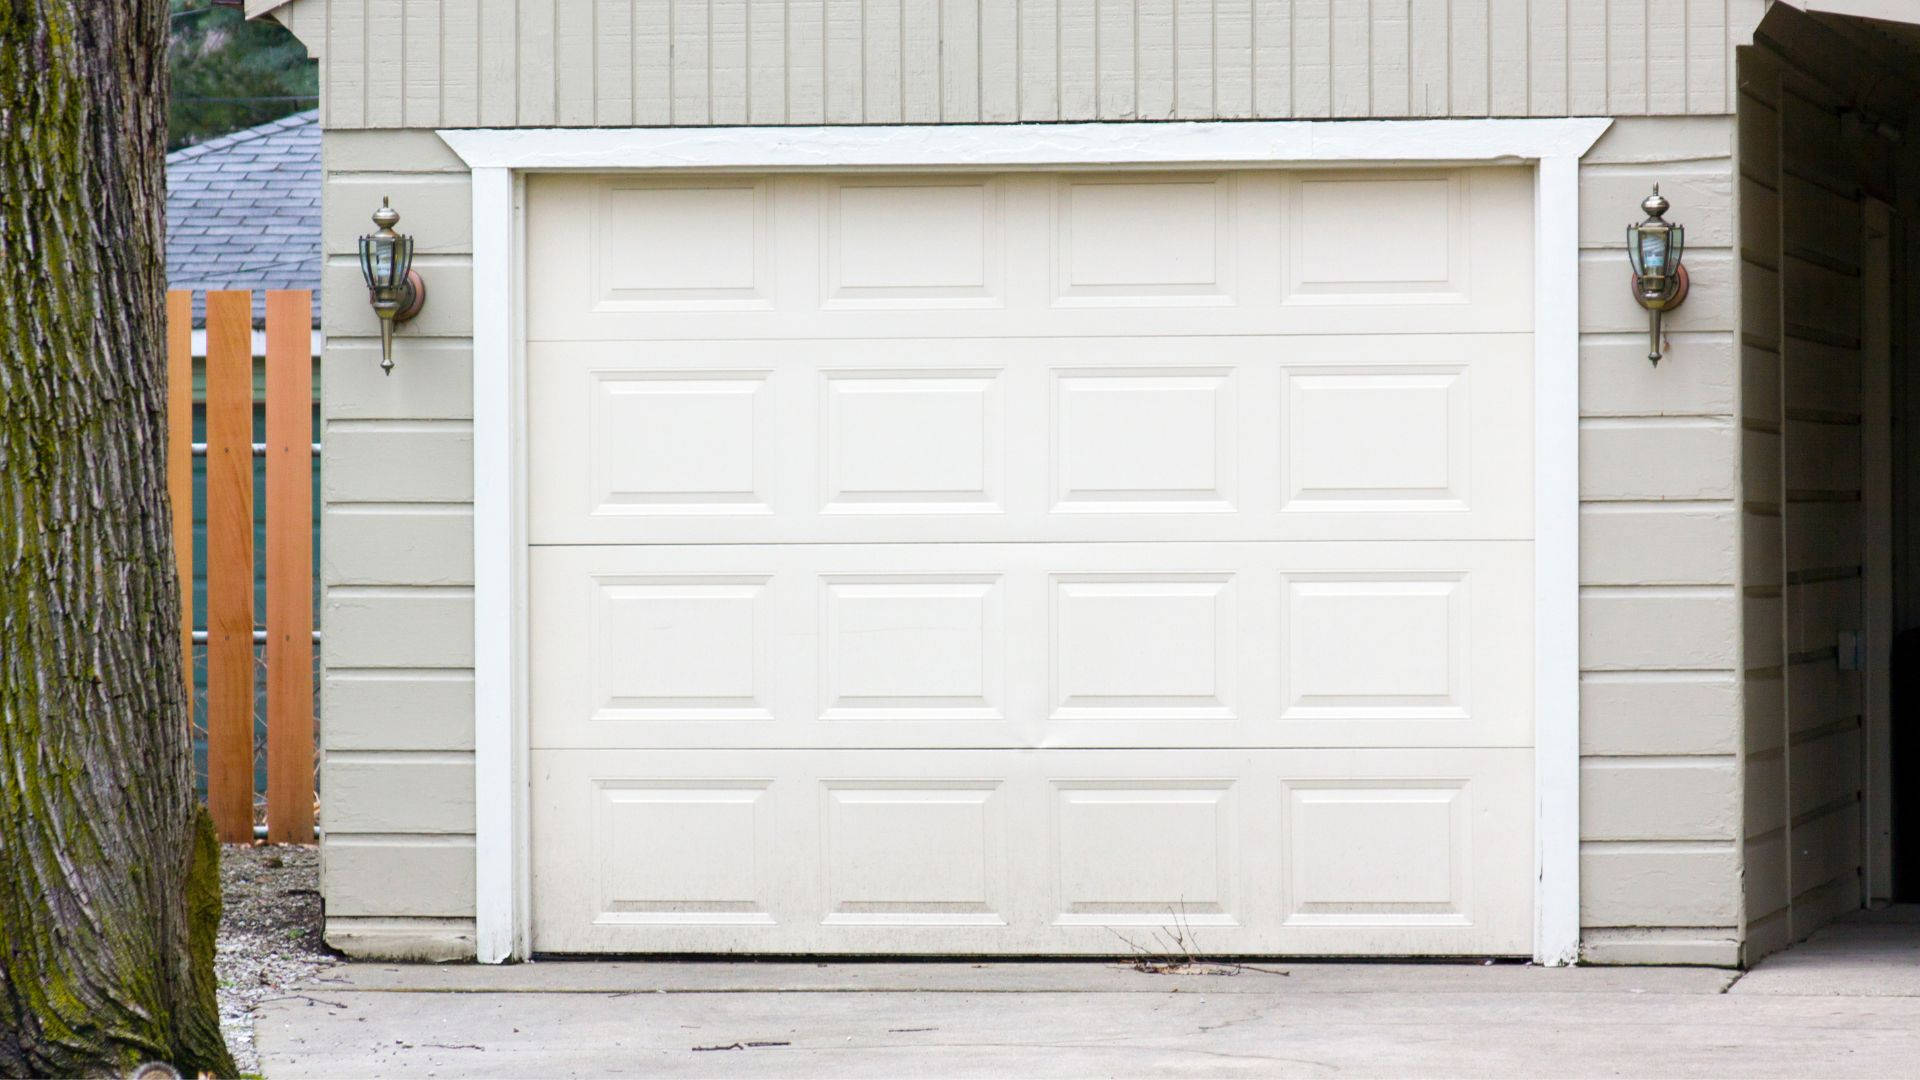 The aesthetic of a neat, closed garage door in white. Wallpaper